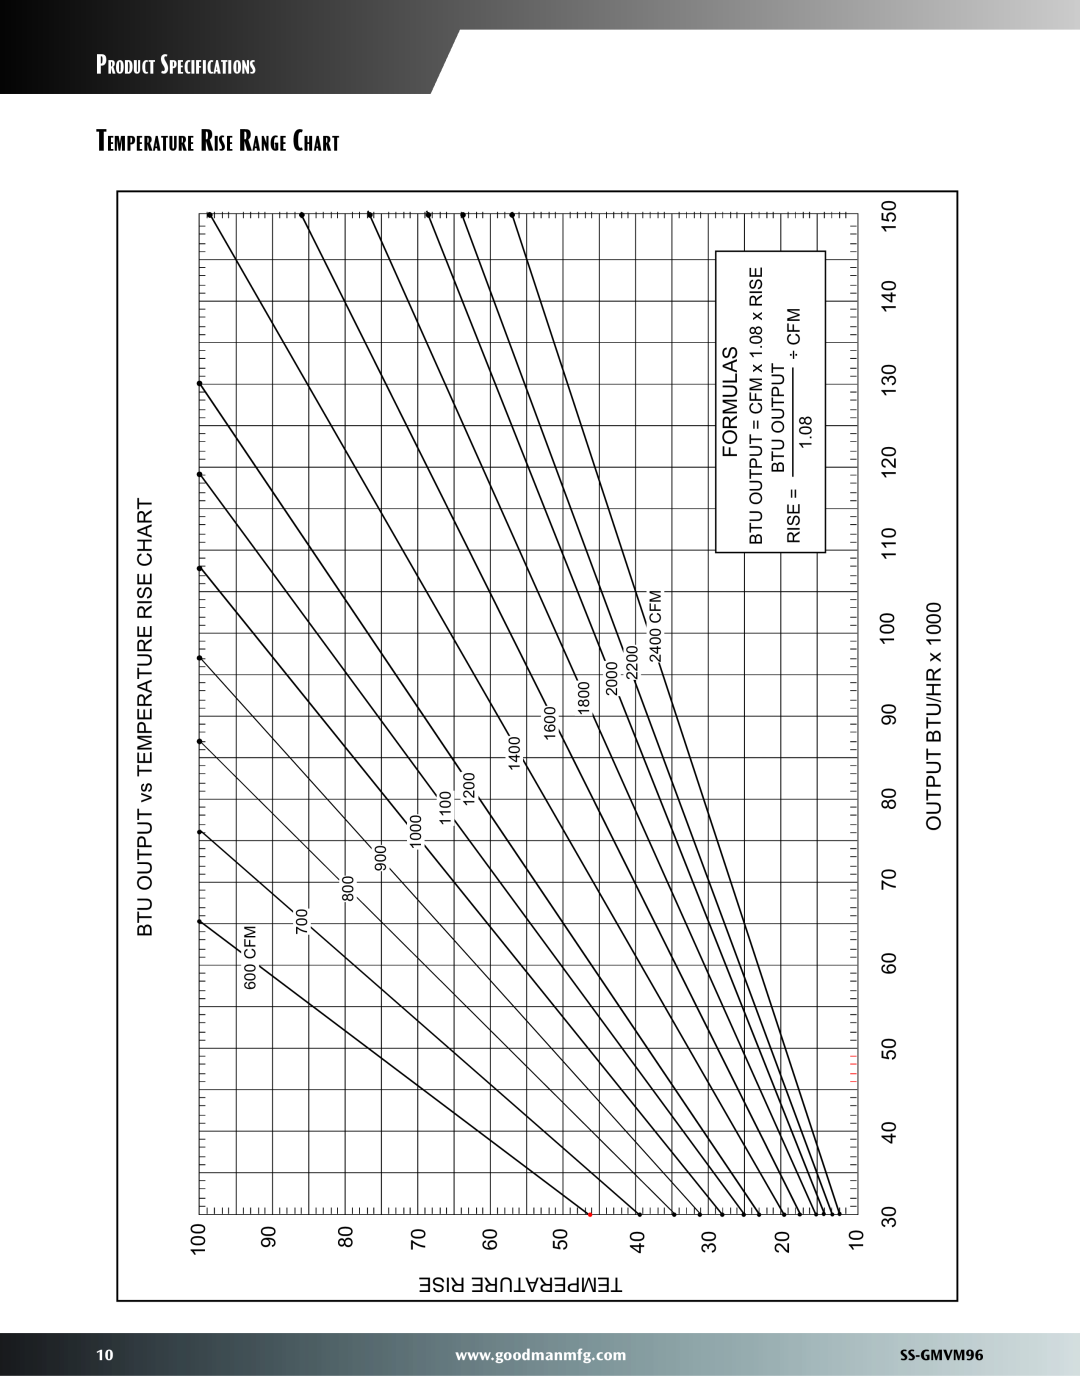 Goodman Mfg GMVM96 dimensions Temperature Rise Range Chart, Product Specifications 